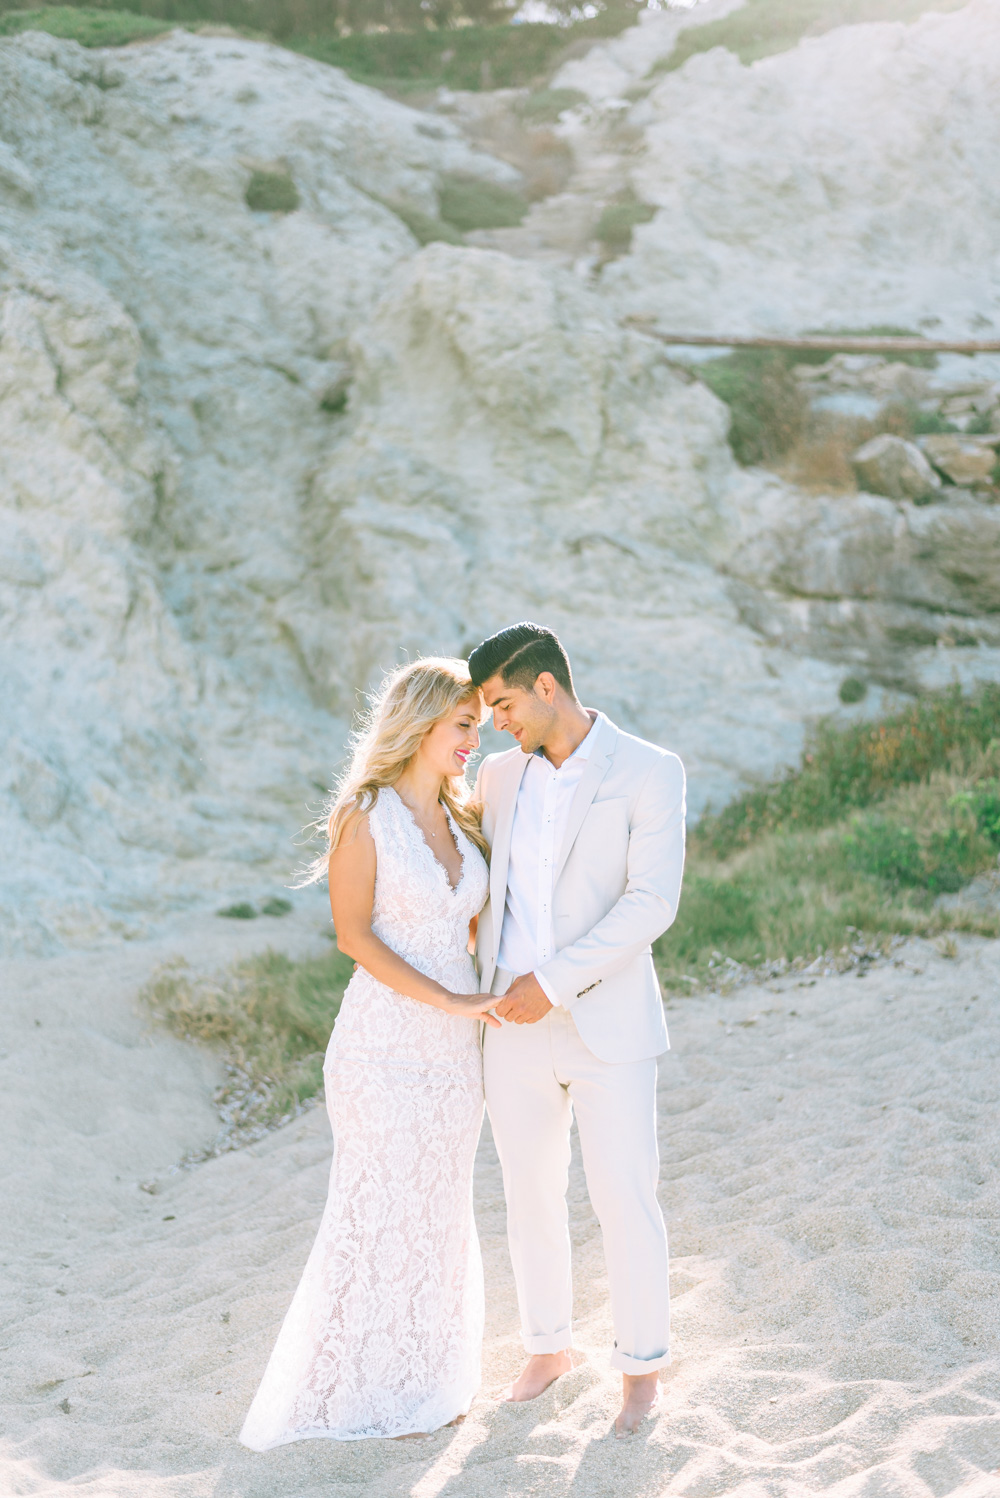 Engagement Photo Ideas: What to wear for engagement photos